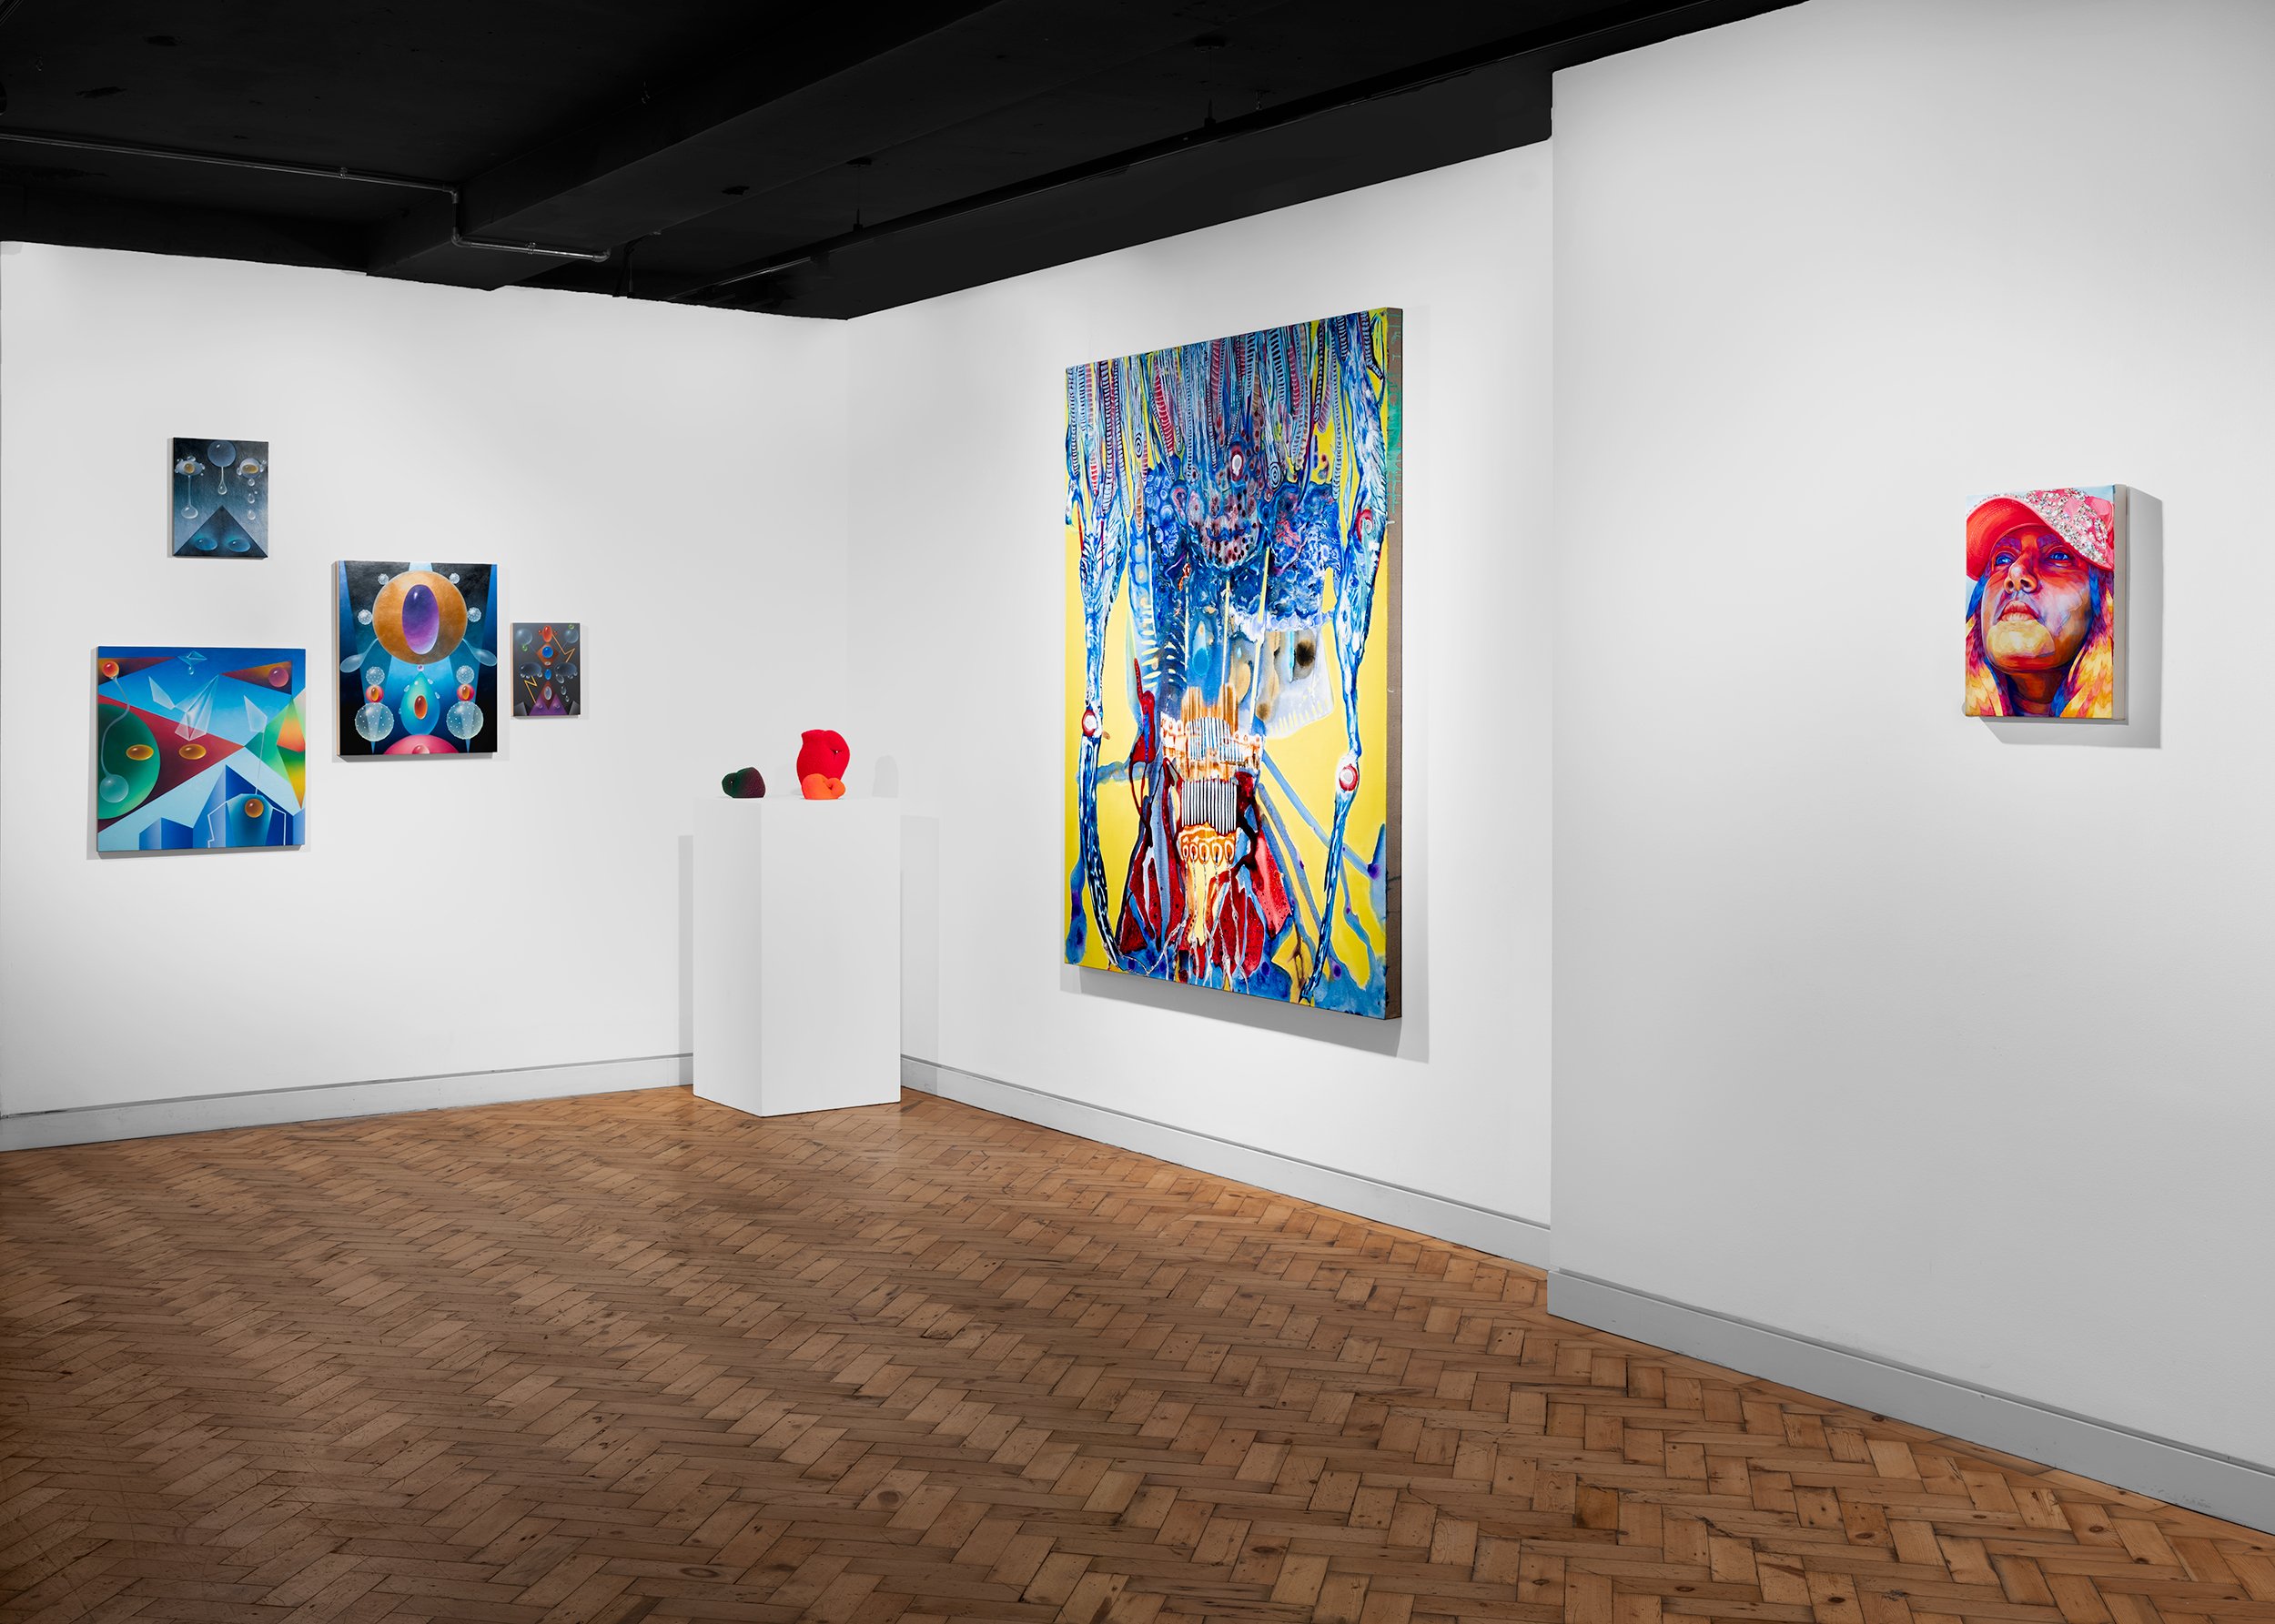 Installation view from "Vanguards" at Unit London, London, UK, 2022.